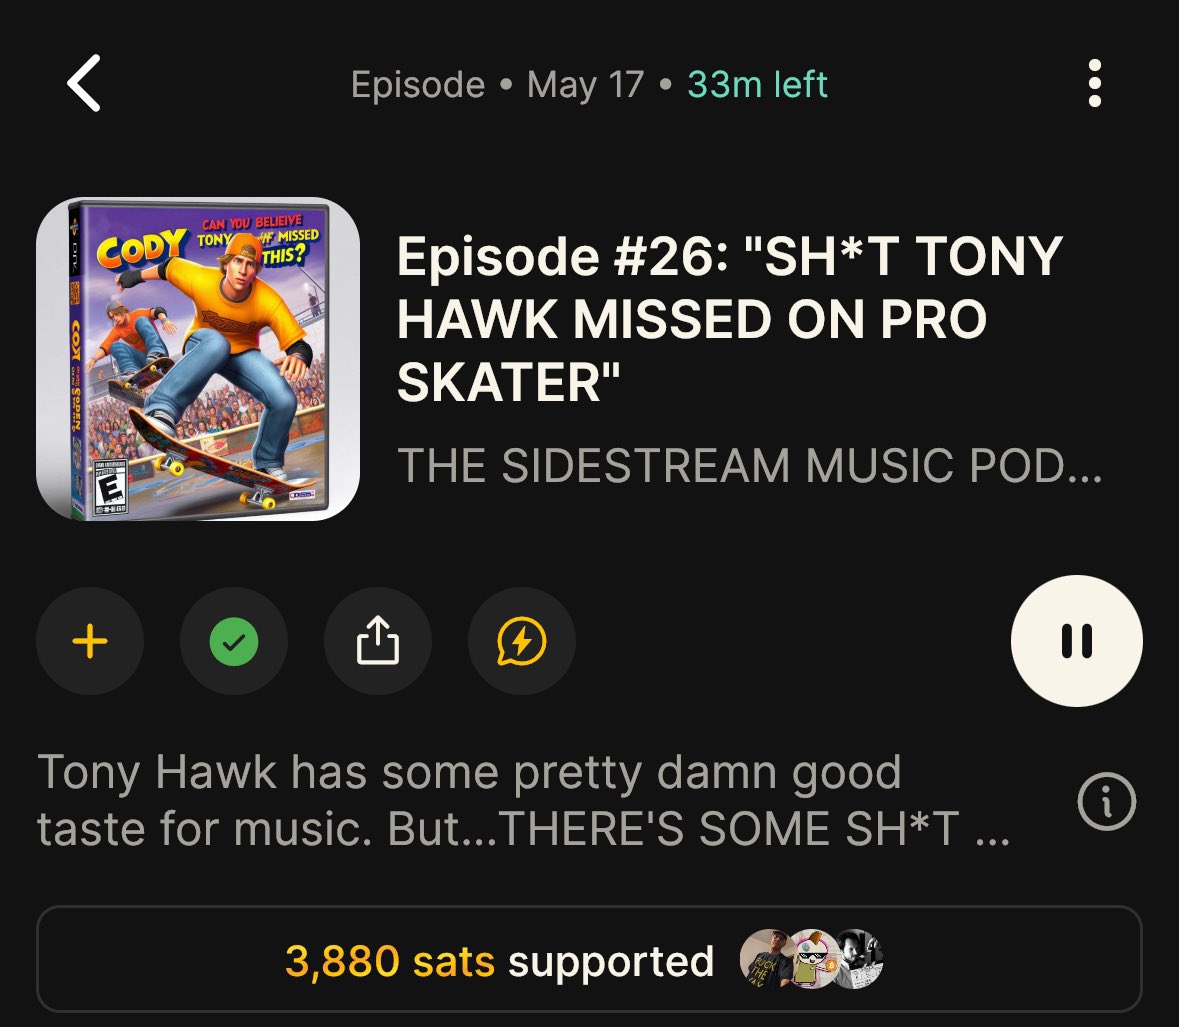 Tony hawk missed so much sick music for his games

Thanks @SmashMyRecords for playing this music in your podcast. Sending you a boostagram for sure
😎🤘

Value4Value